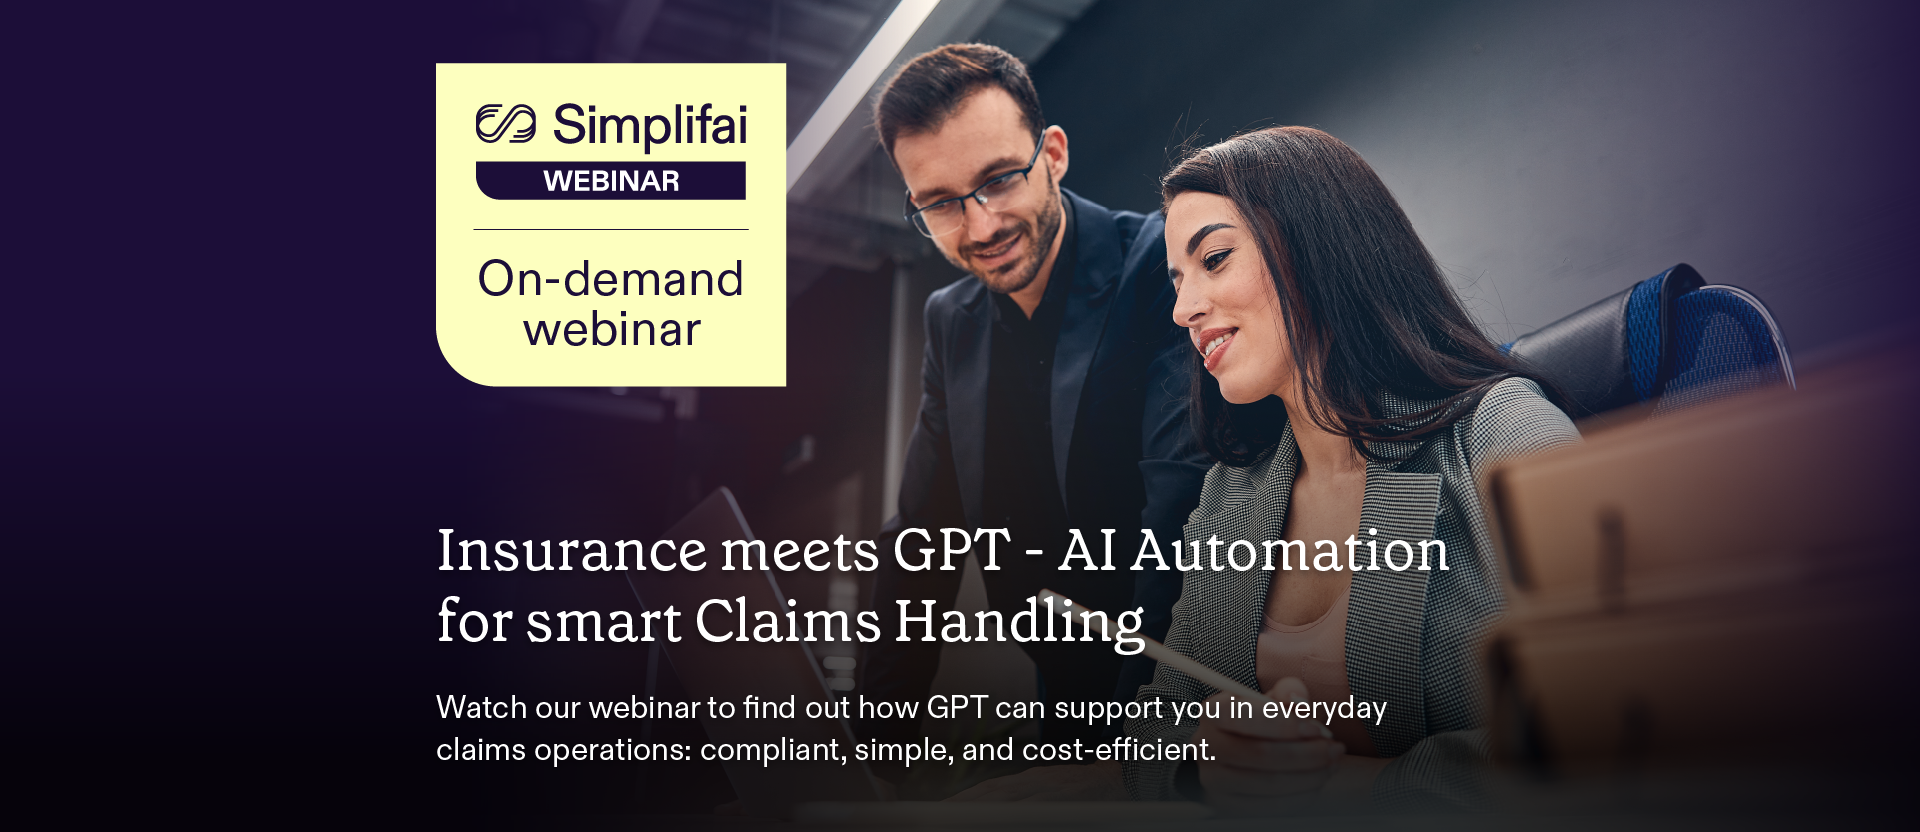 Insurance meets GPT - AI Automation for smart Claims Handling